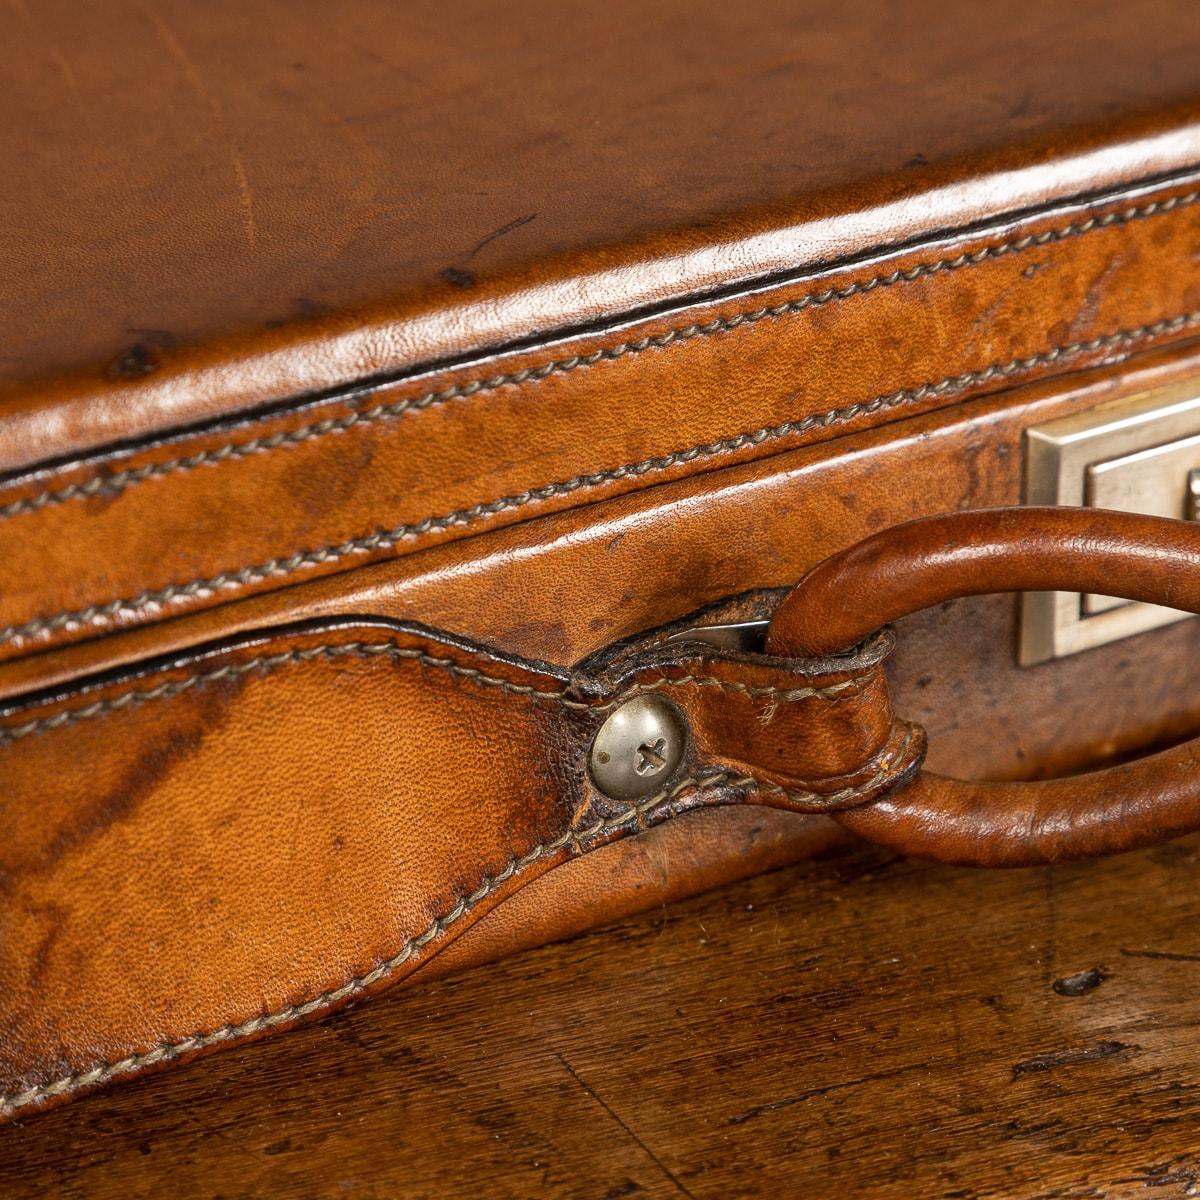 20th Century American Leather Briefcase by Hartmann, circa 1920 For Sale 5